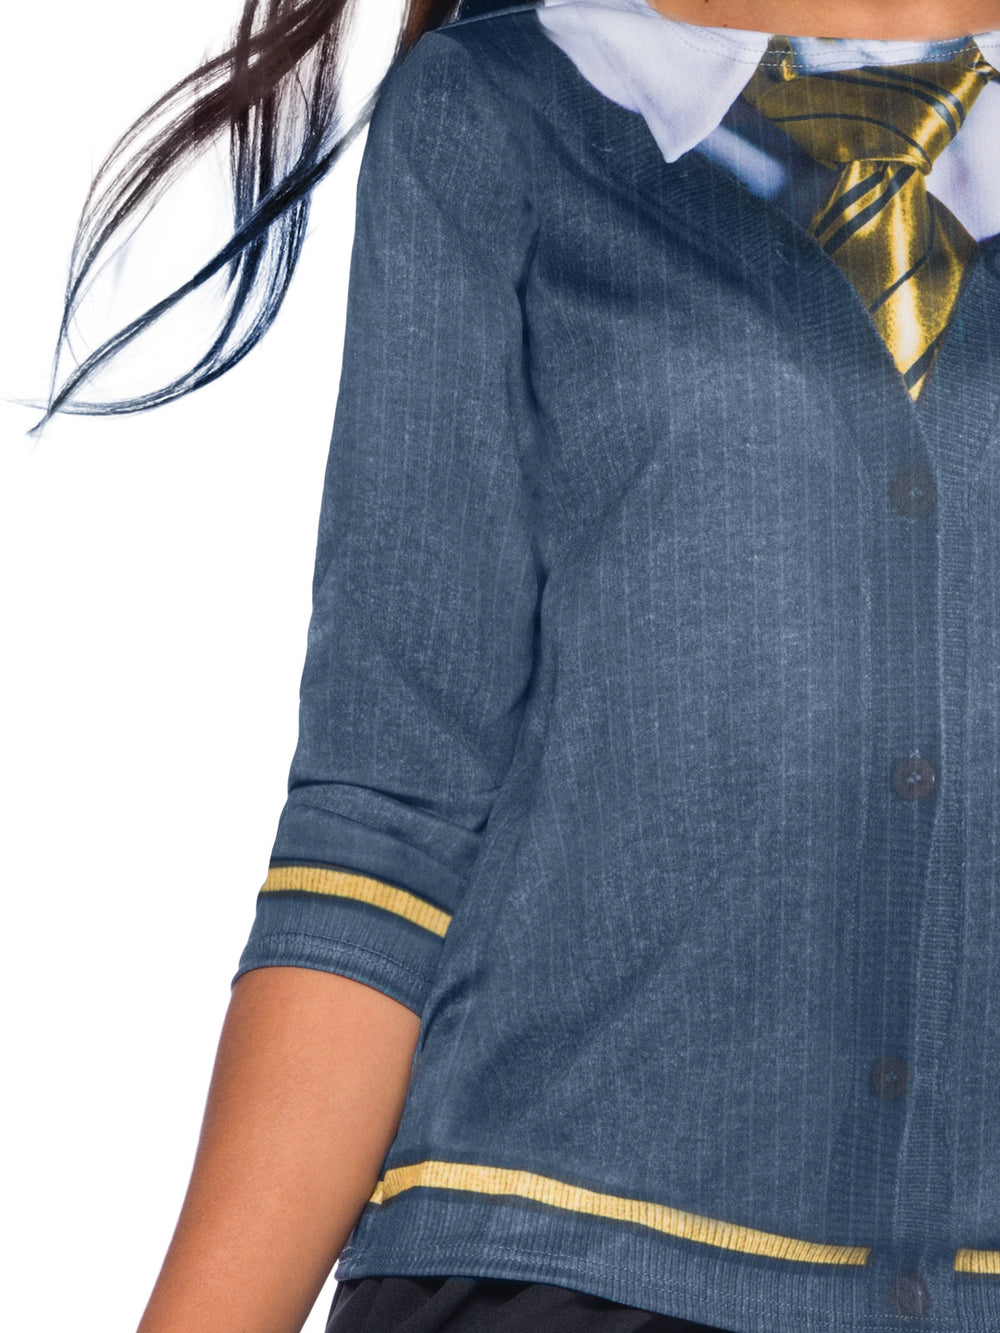 HUFFLEPUFF COSTUME TOP, CHILD - Little Shop of Horrors